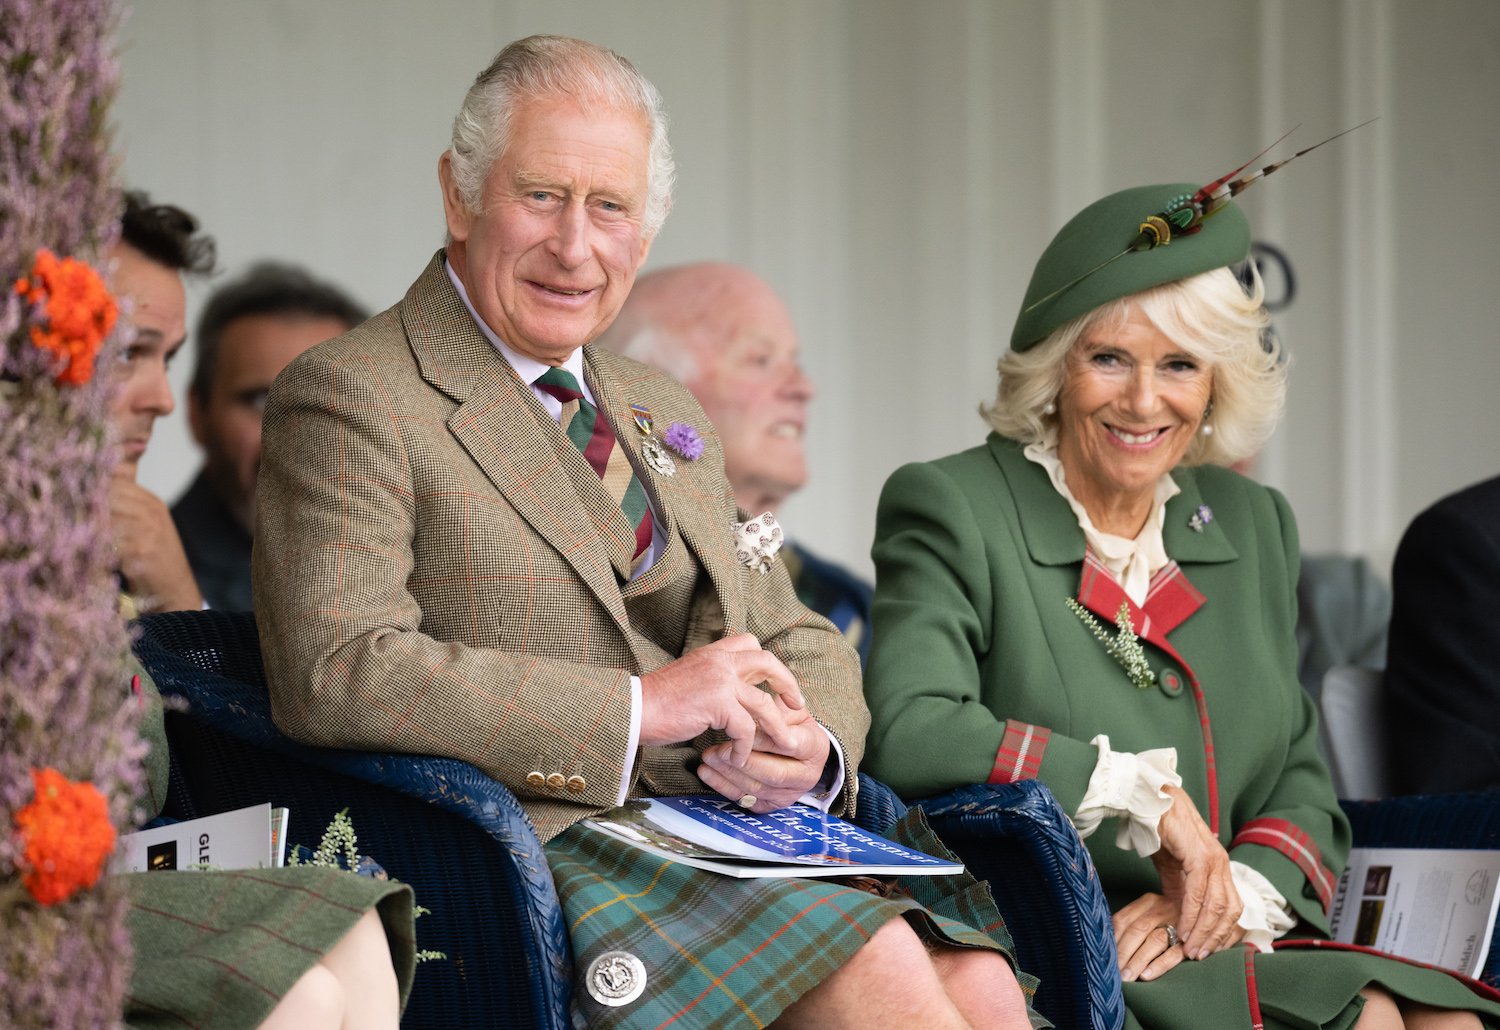 King Charles and Camilla Parker Bowles body language in new Christmas card 2022 analyzed by expert